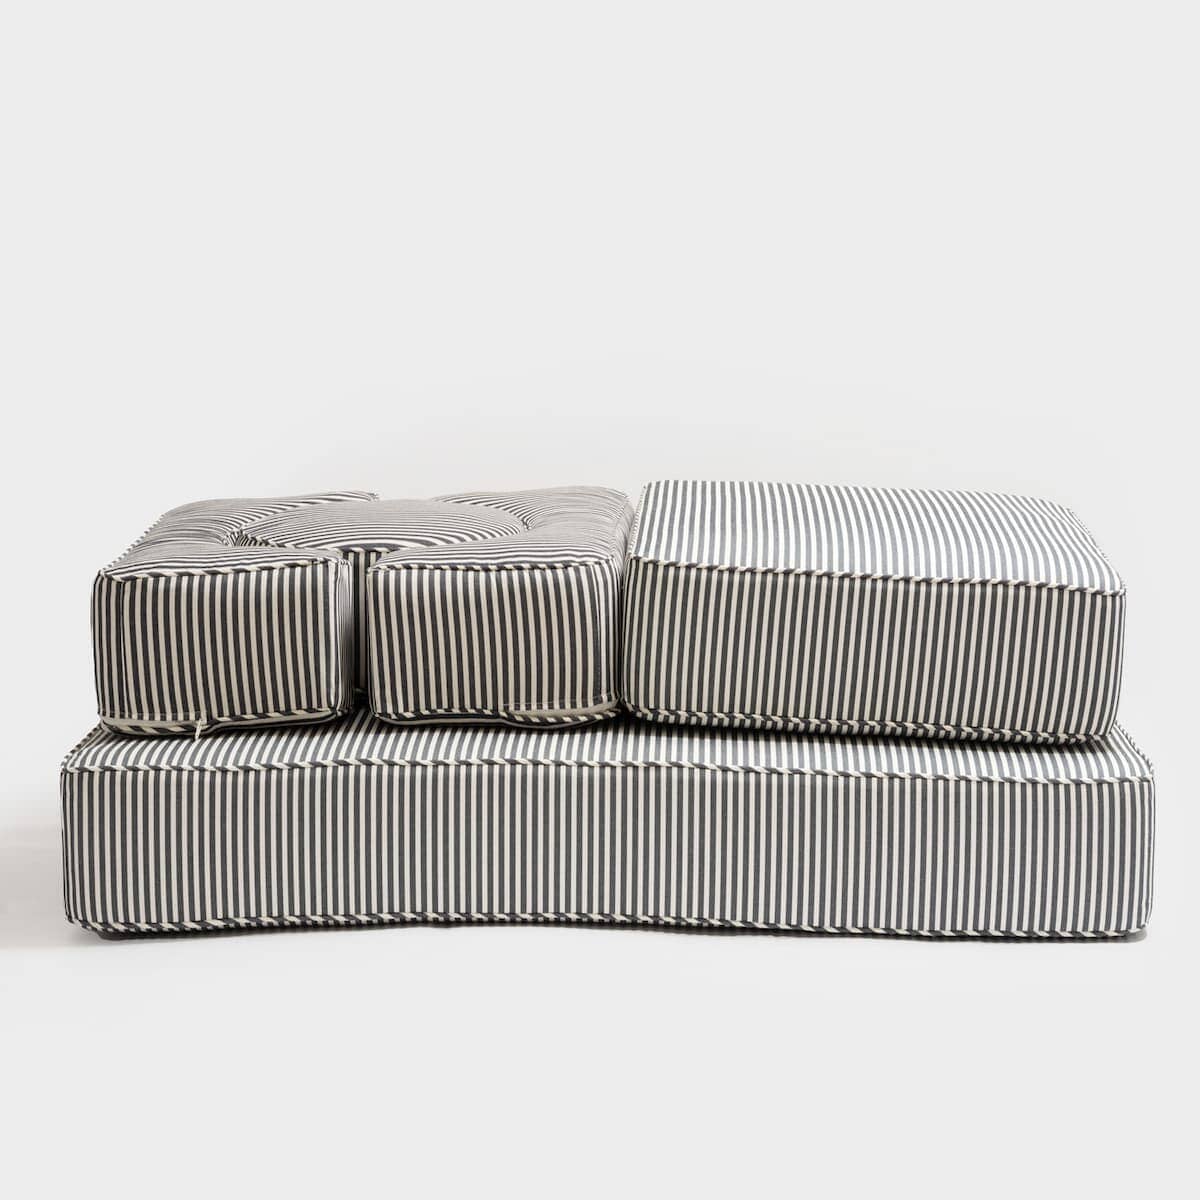 Studio image of the side view of the stacked modular pillow stack